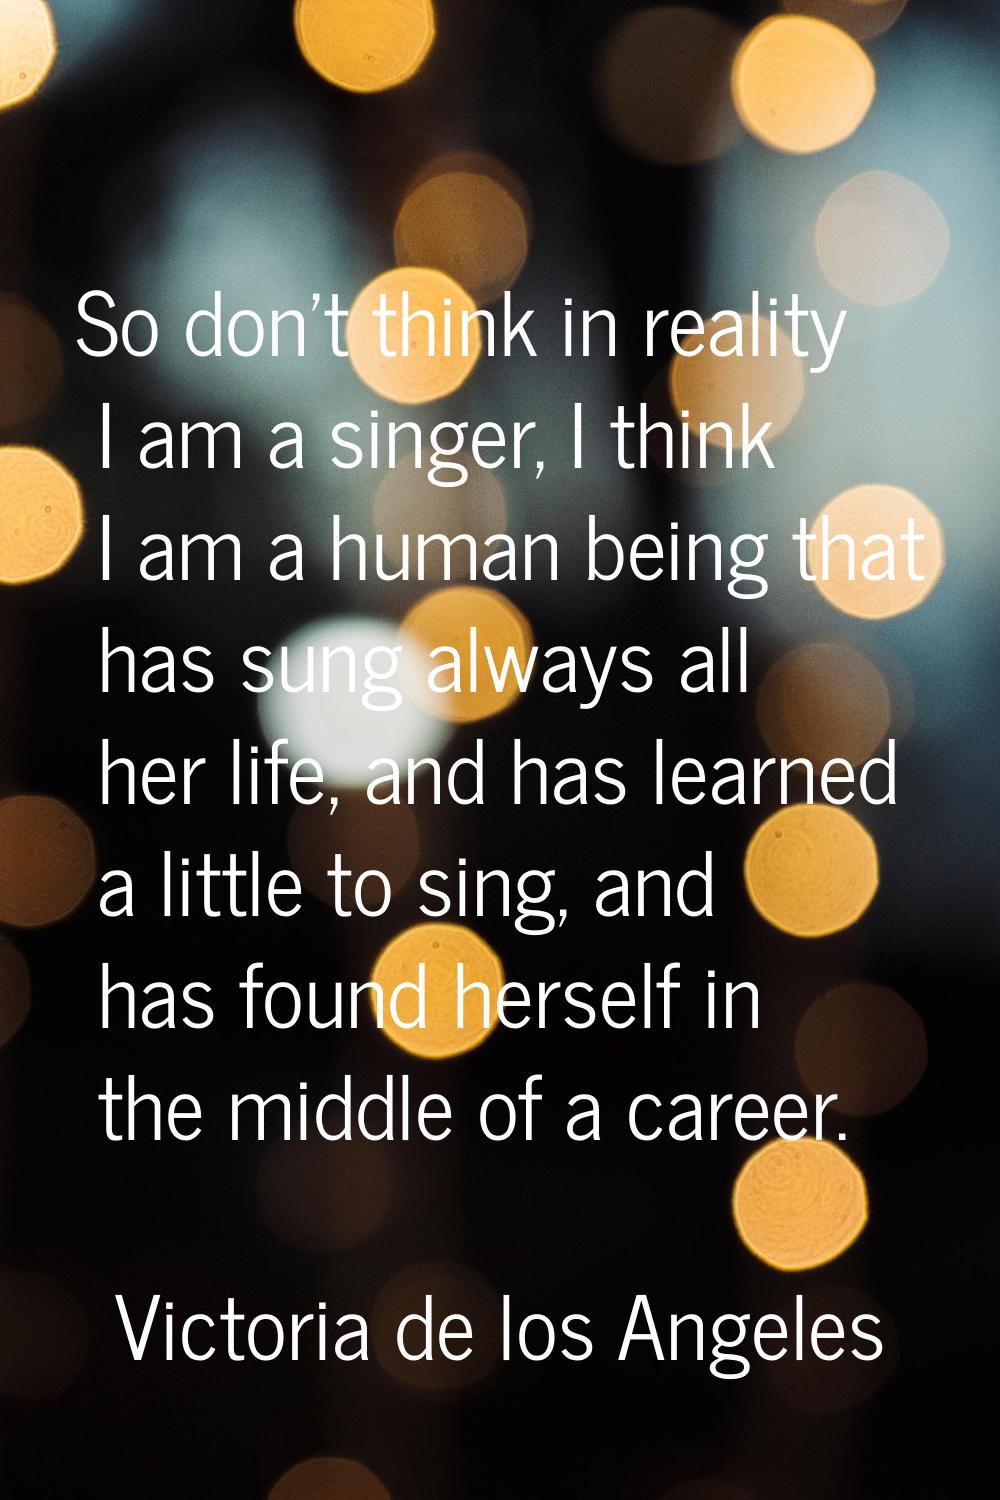 So don't think in reality I am a singer, I think I am a human being that has sung always all her li